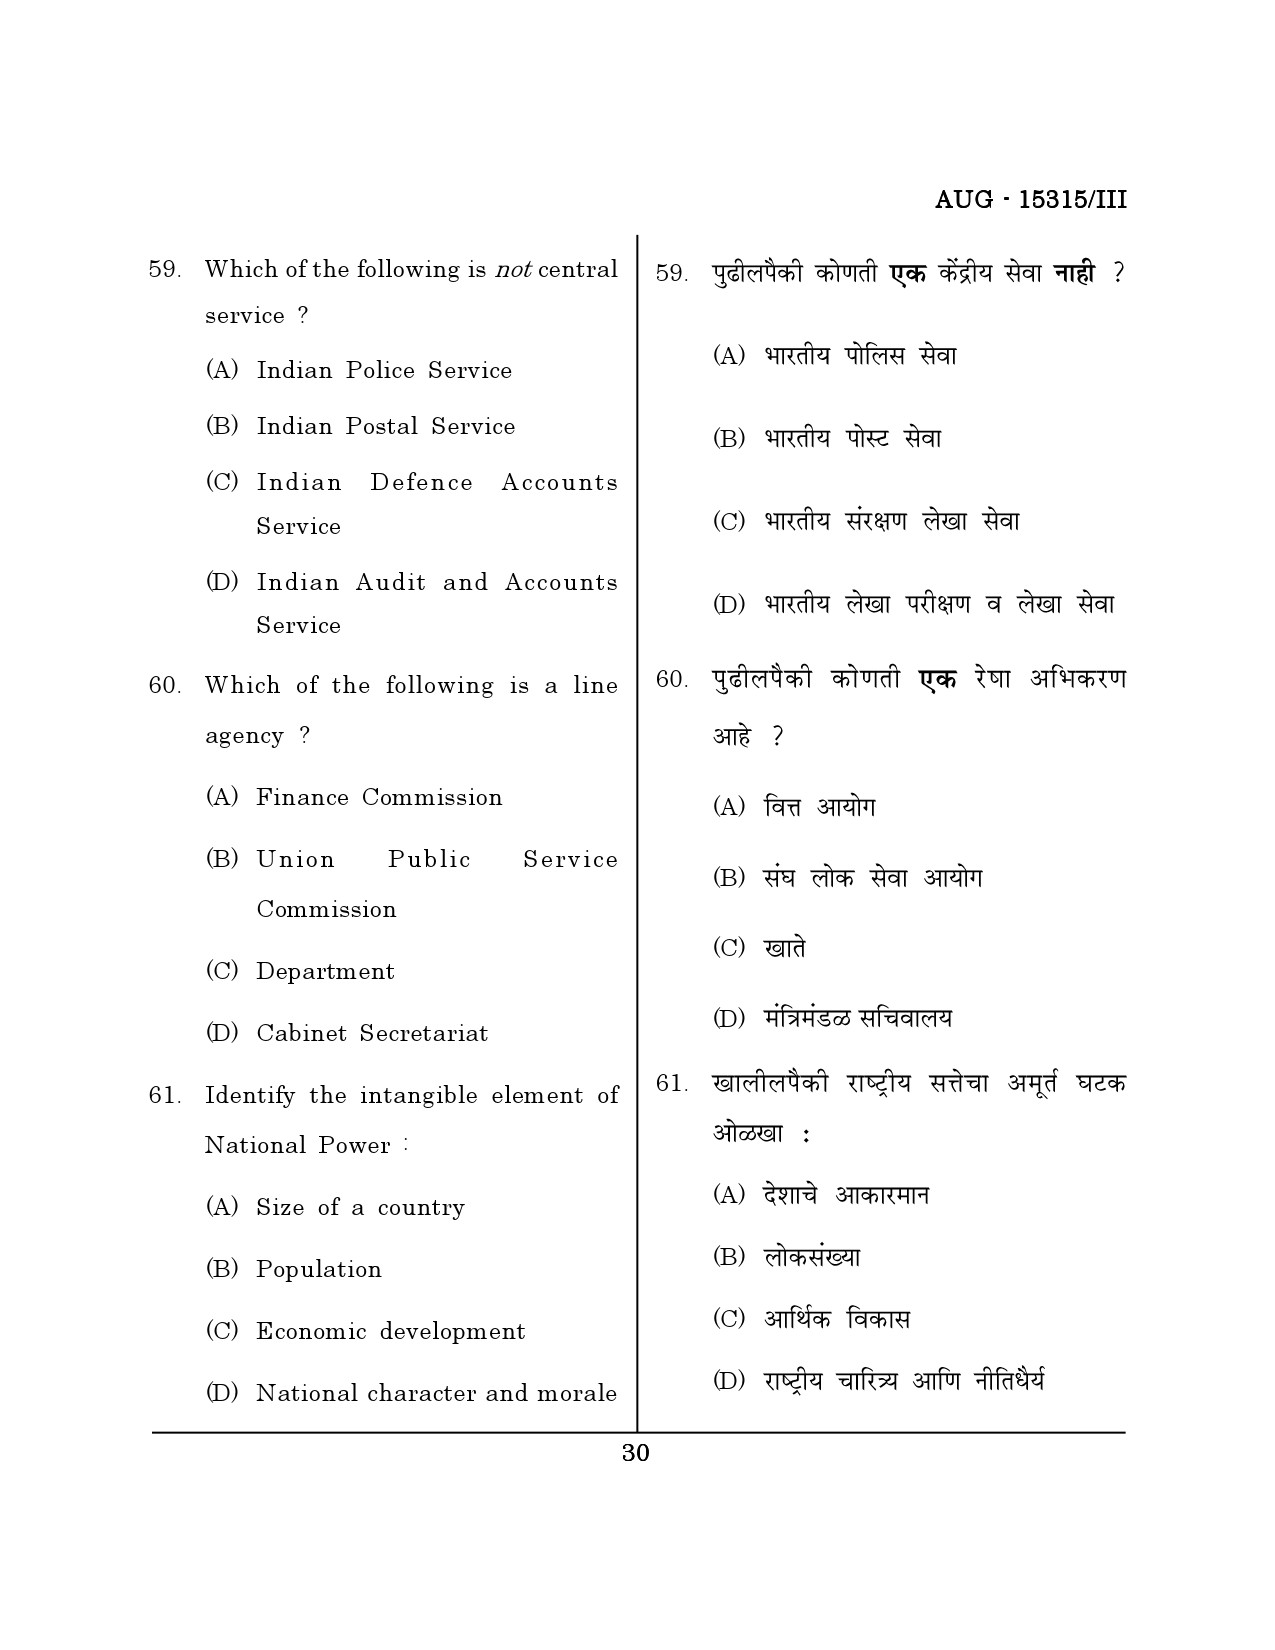 Maharashtra SET Political Science Question Paper III August 2015 29